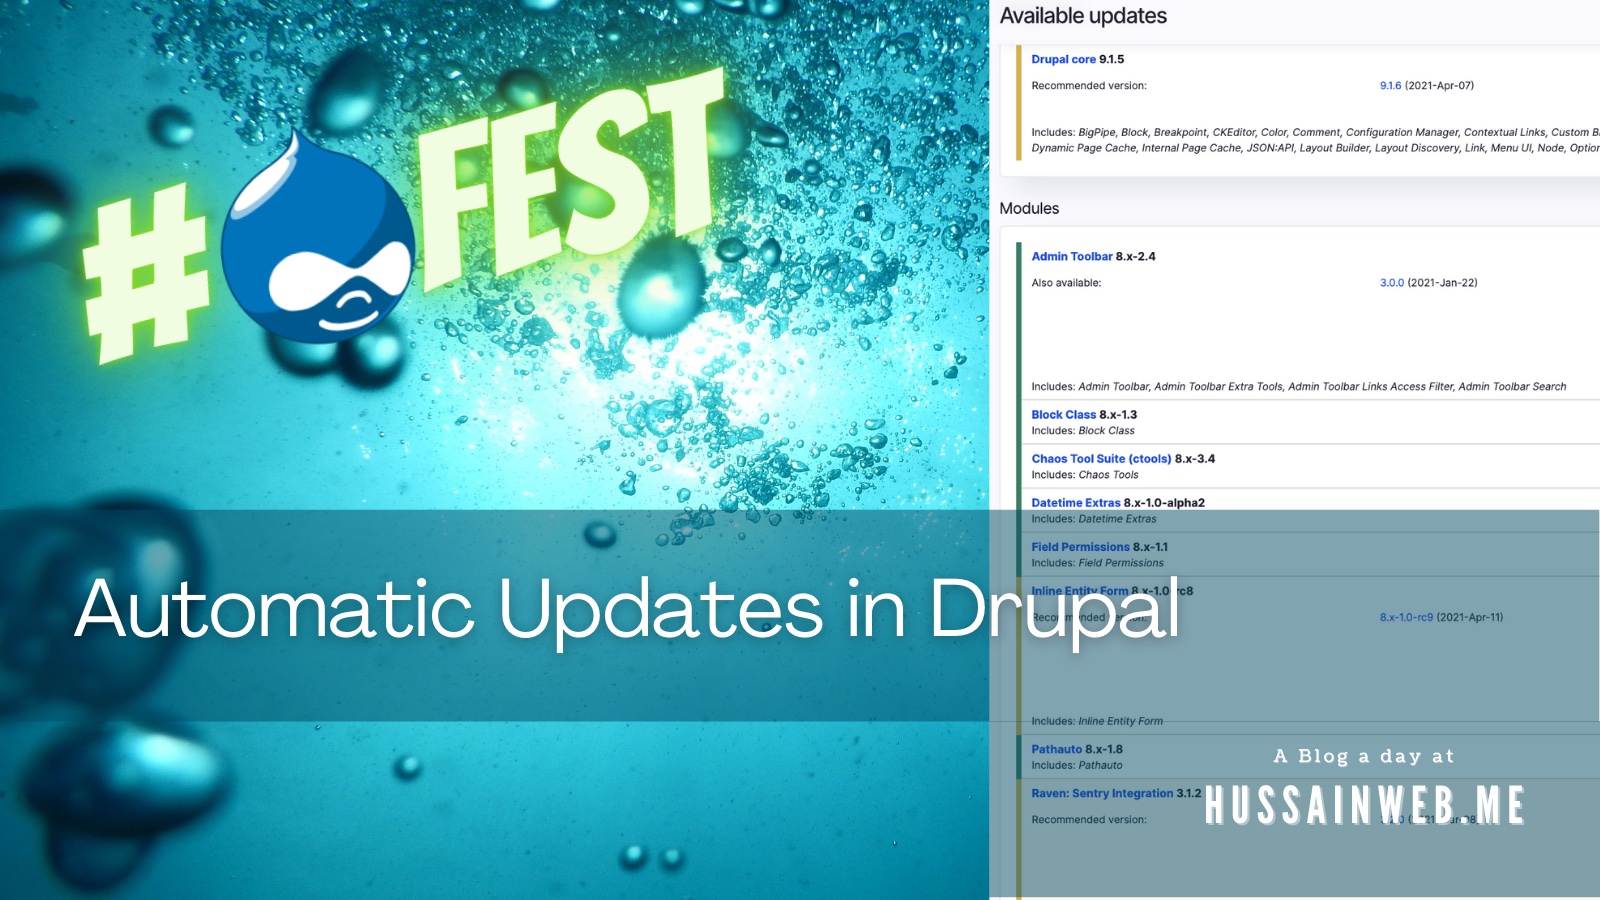 My thoughts on Automatic Updates in Drupal